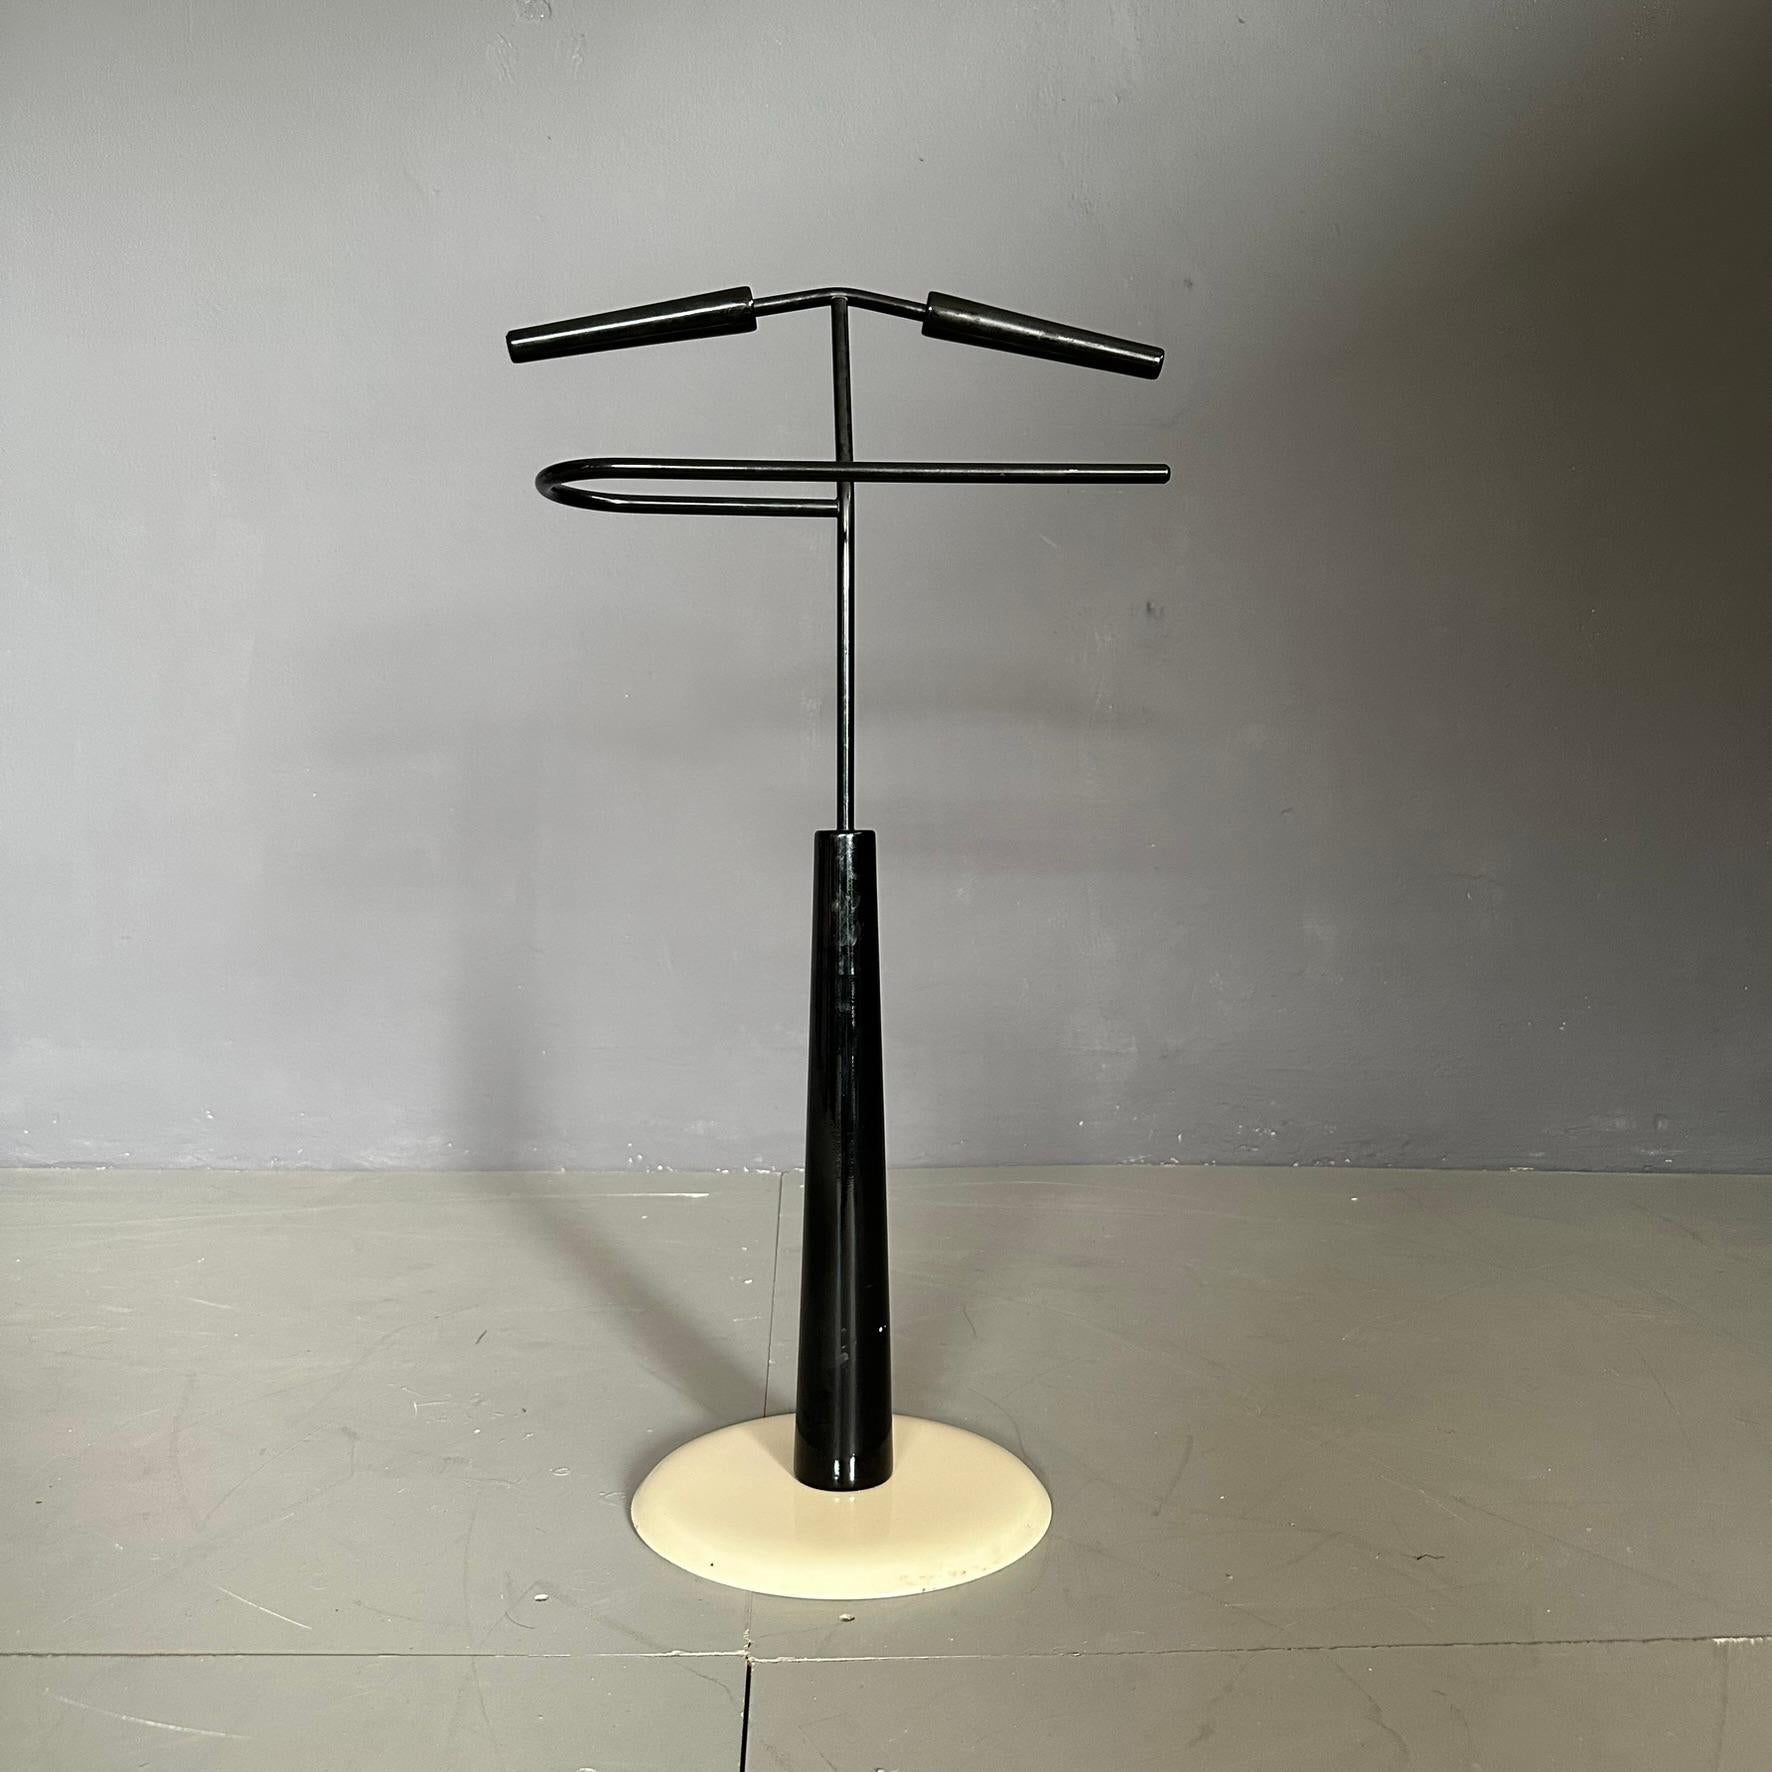 Valet stand/coat stand from the 1980s, Italian manufacture.
Structure in black painted wood with cream-colored metal base.
Very good condition
Height 87 cm 
1 piece available